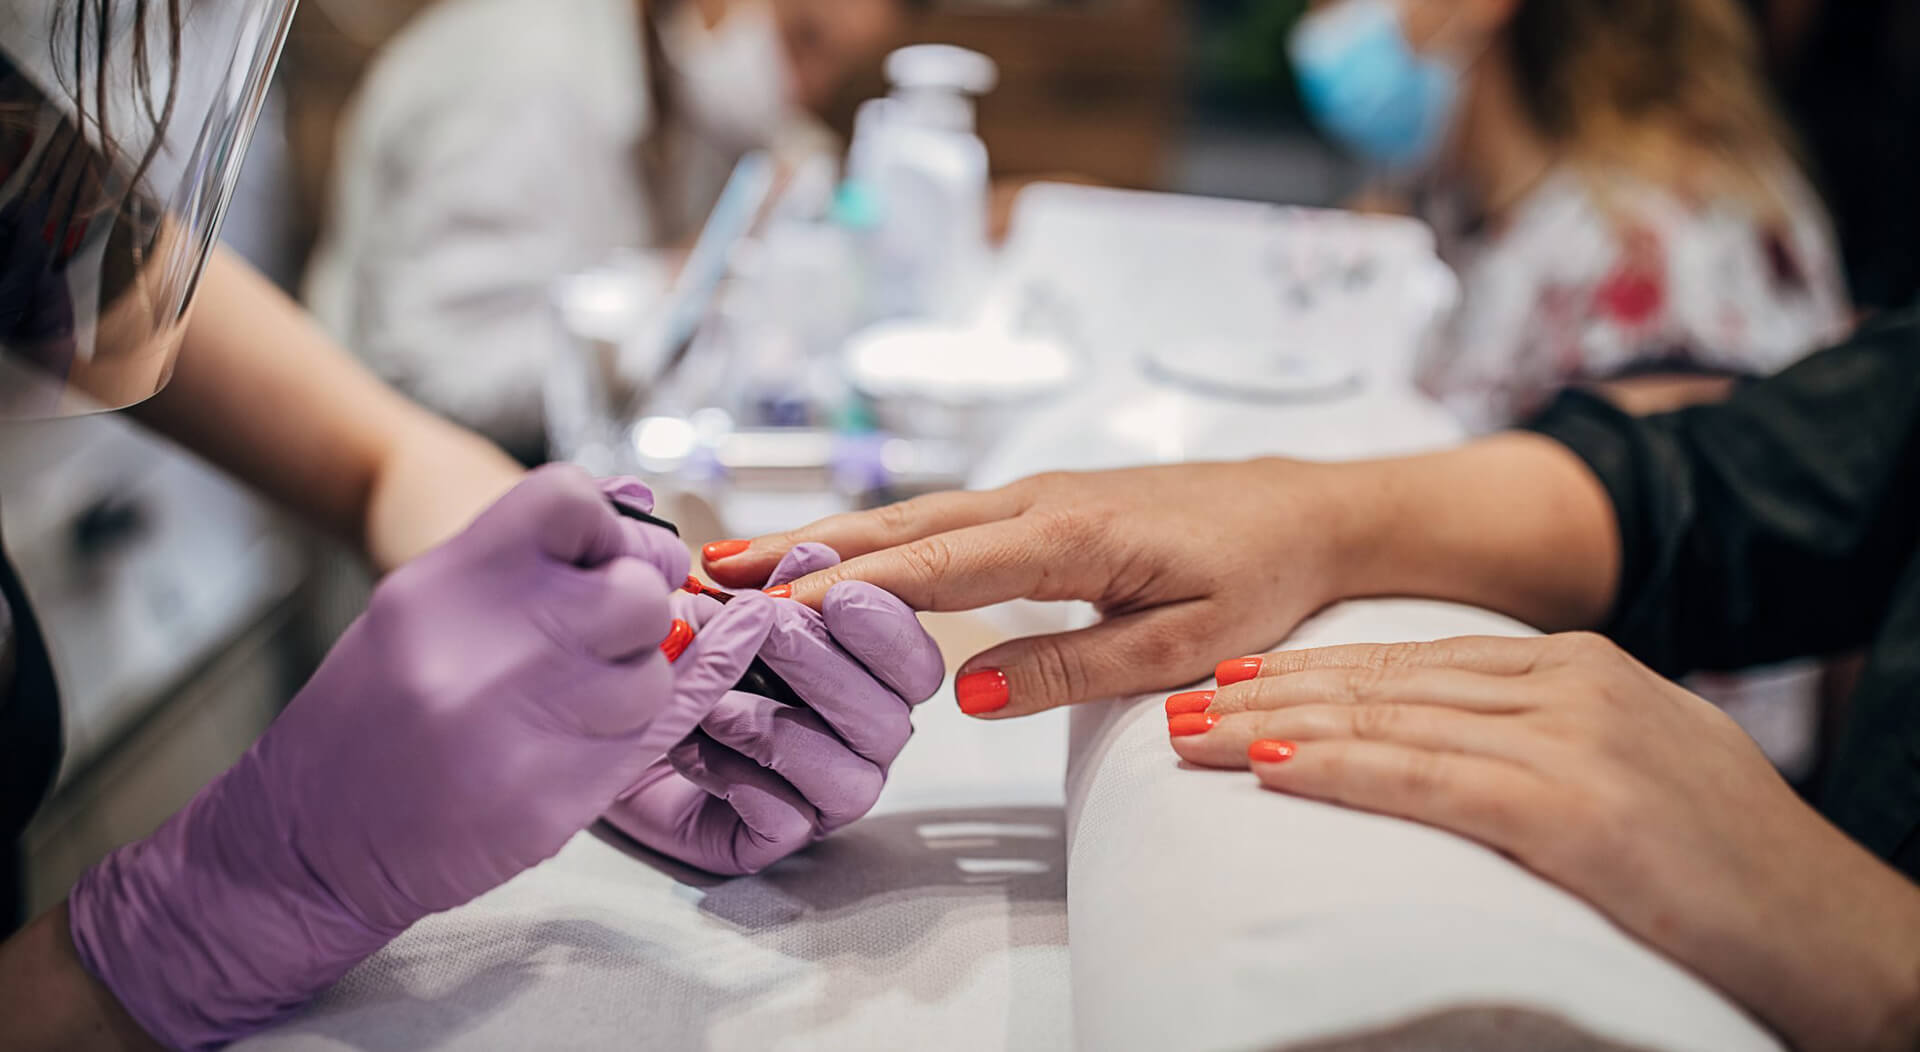 How to Start a Profitable Mobile Nail Salon Business